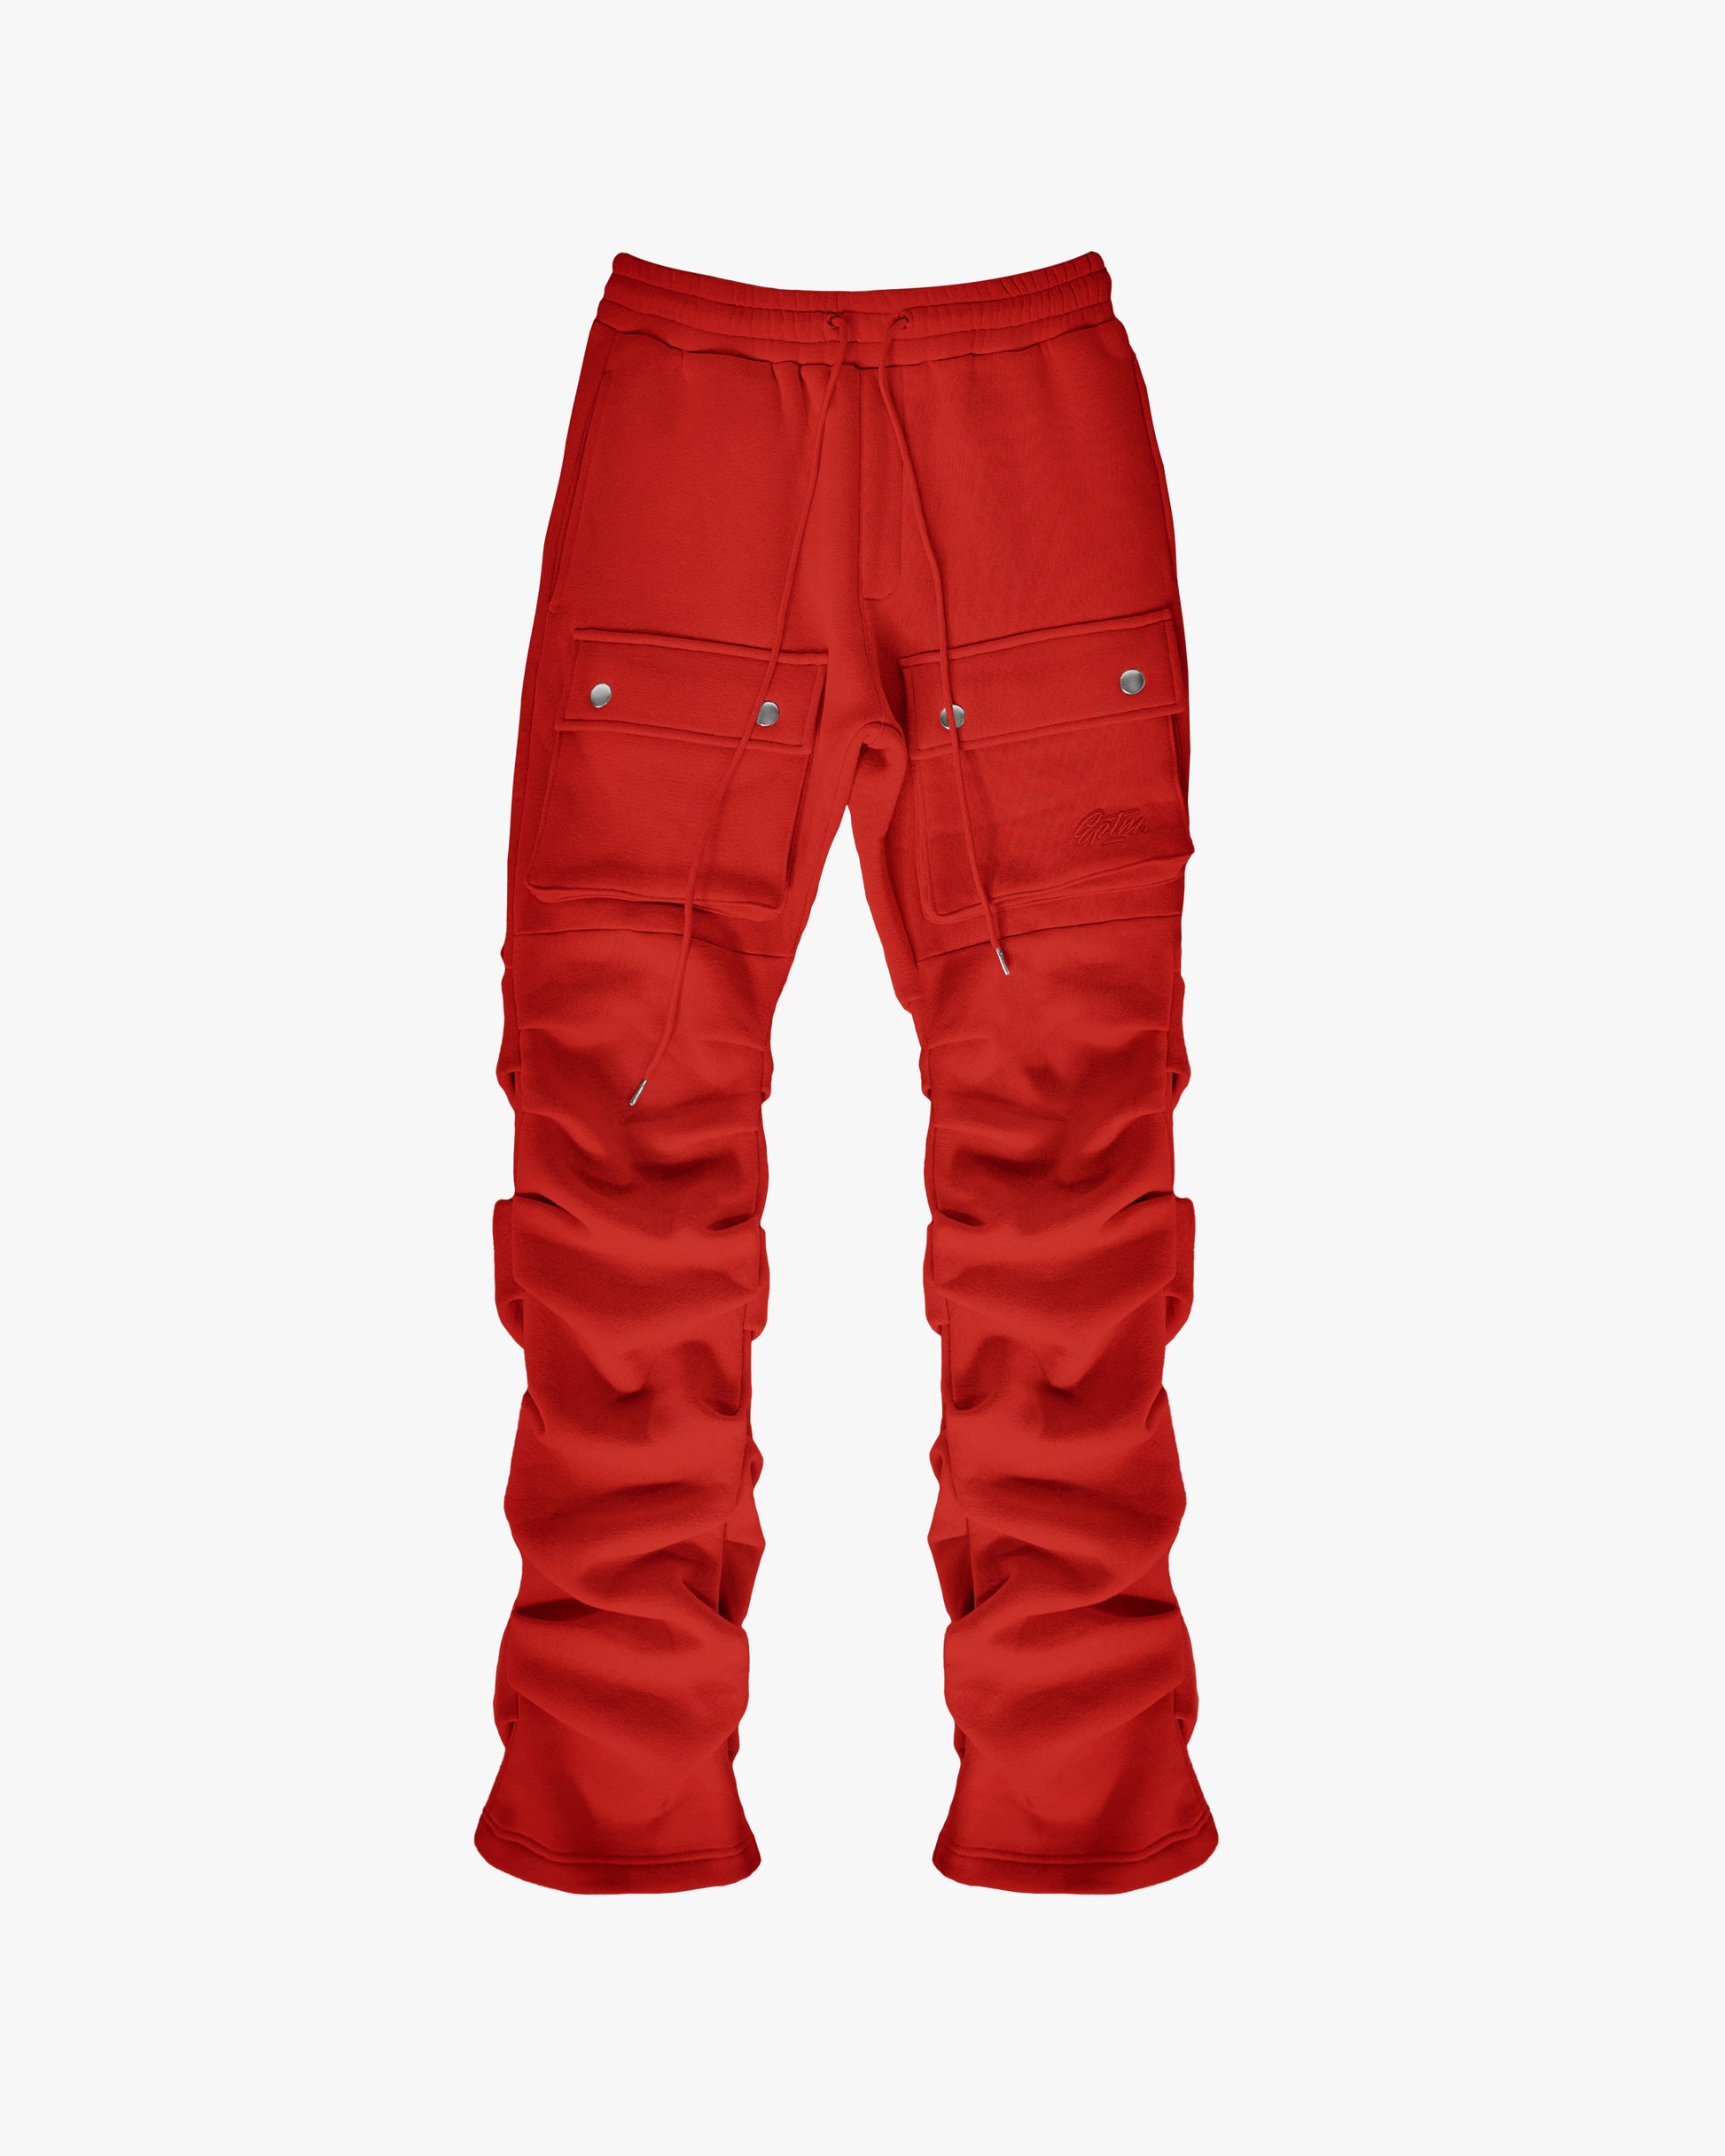 EPTM STACKED CARGO SWEATPANTS-RED – EPTM.